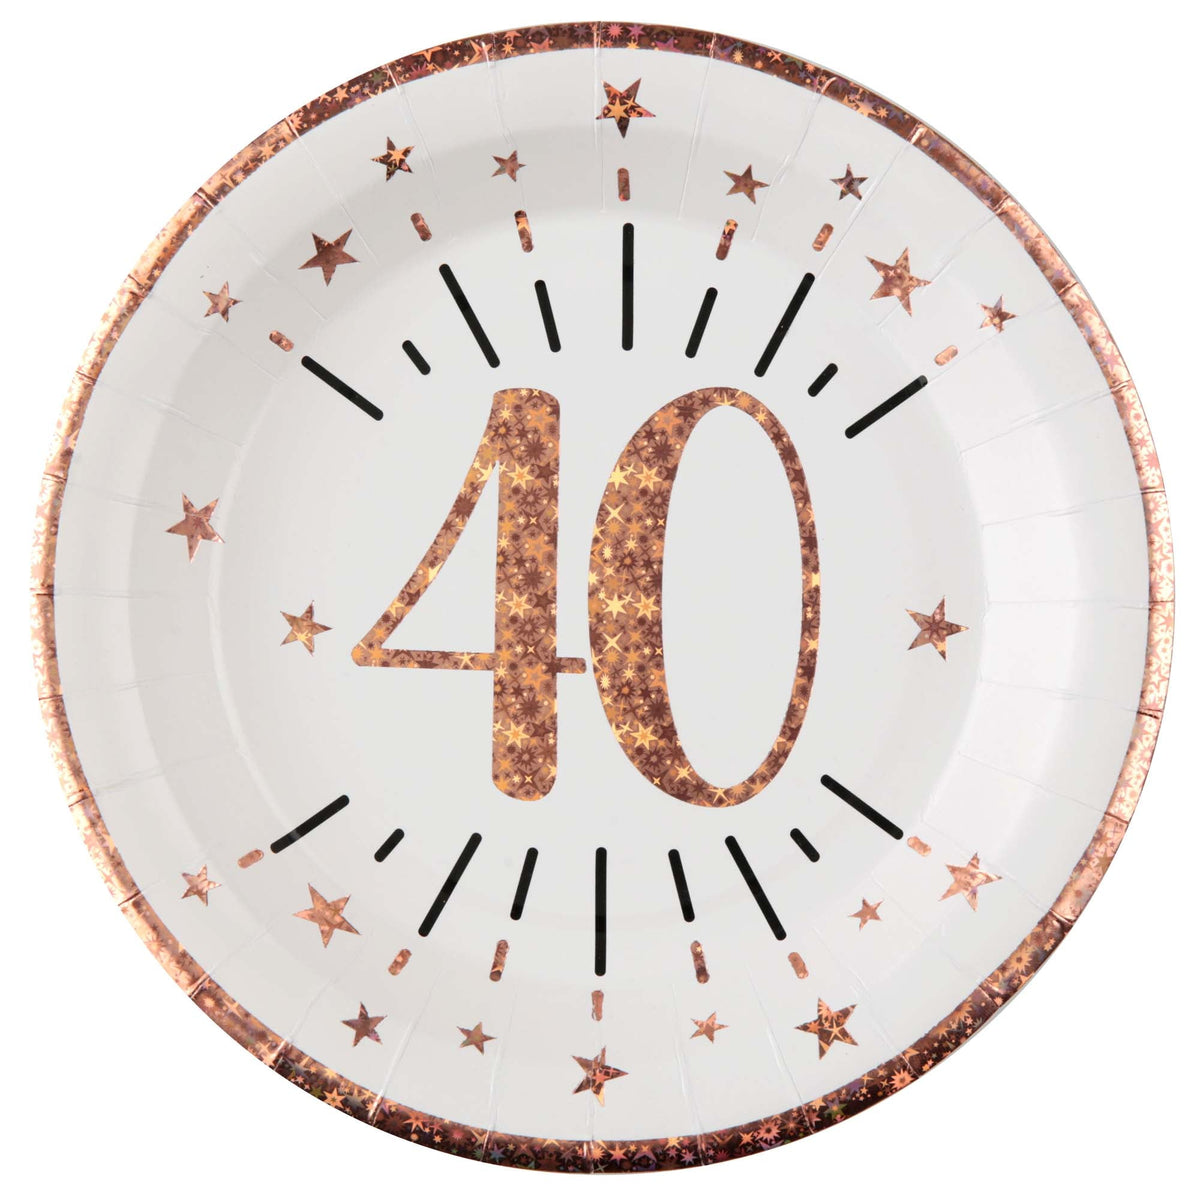 SANTEX Age Specific Birthday Rose Gold 40th Birthday Large Round Lunch Paper Plates, 9 Inches, 10 Count 3660380069850